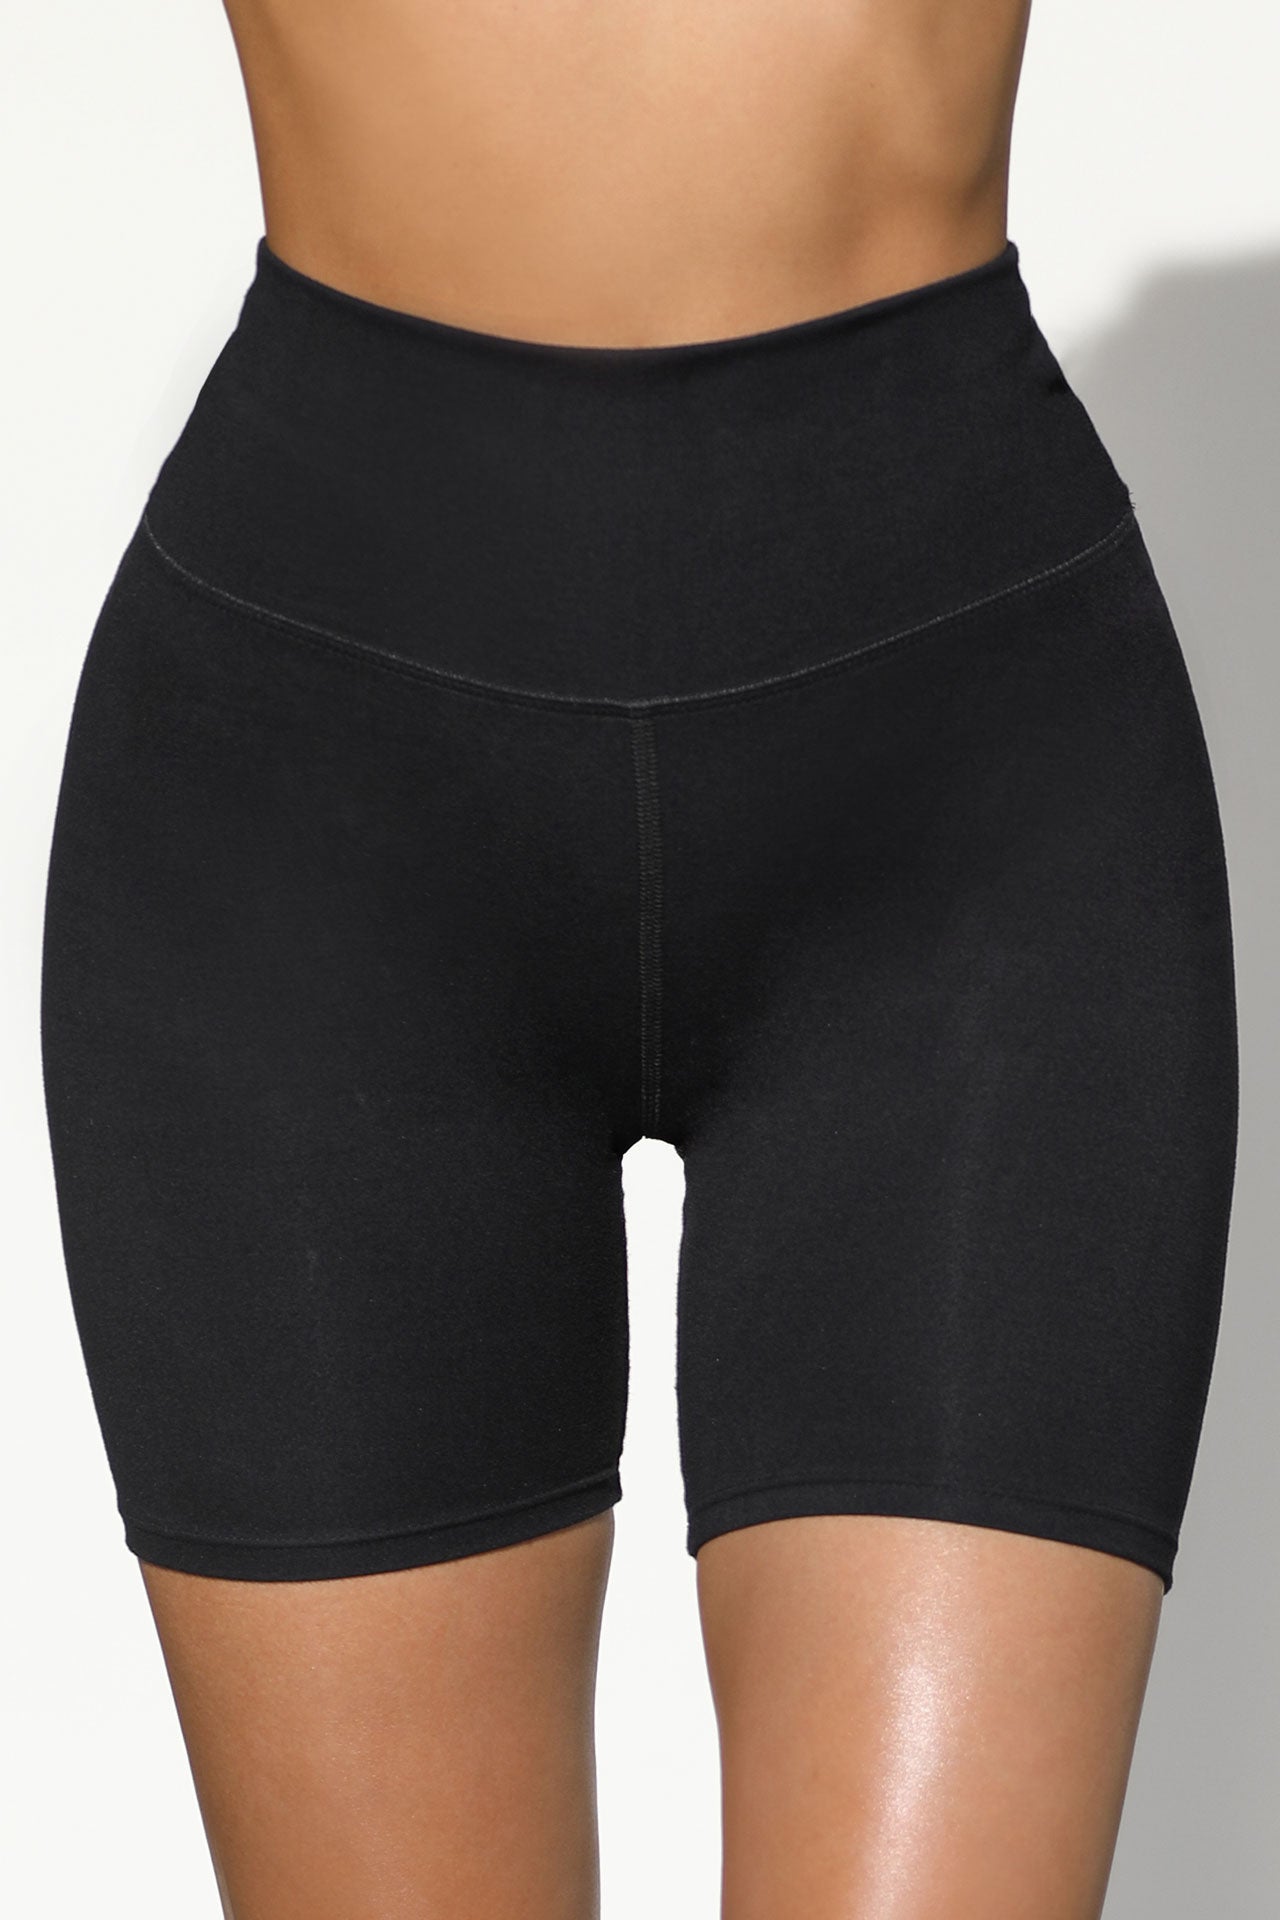 Close up front view of model from the waist down wearing the soft stretchy high-waisted sueded onyx Biker Short with a wide waistband